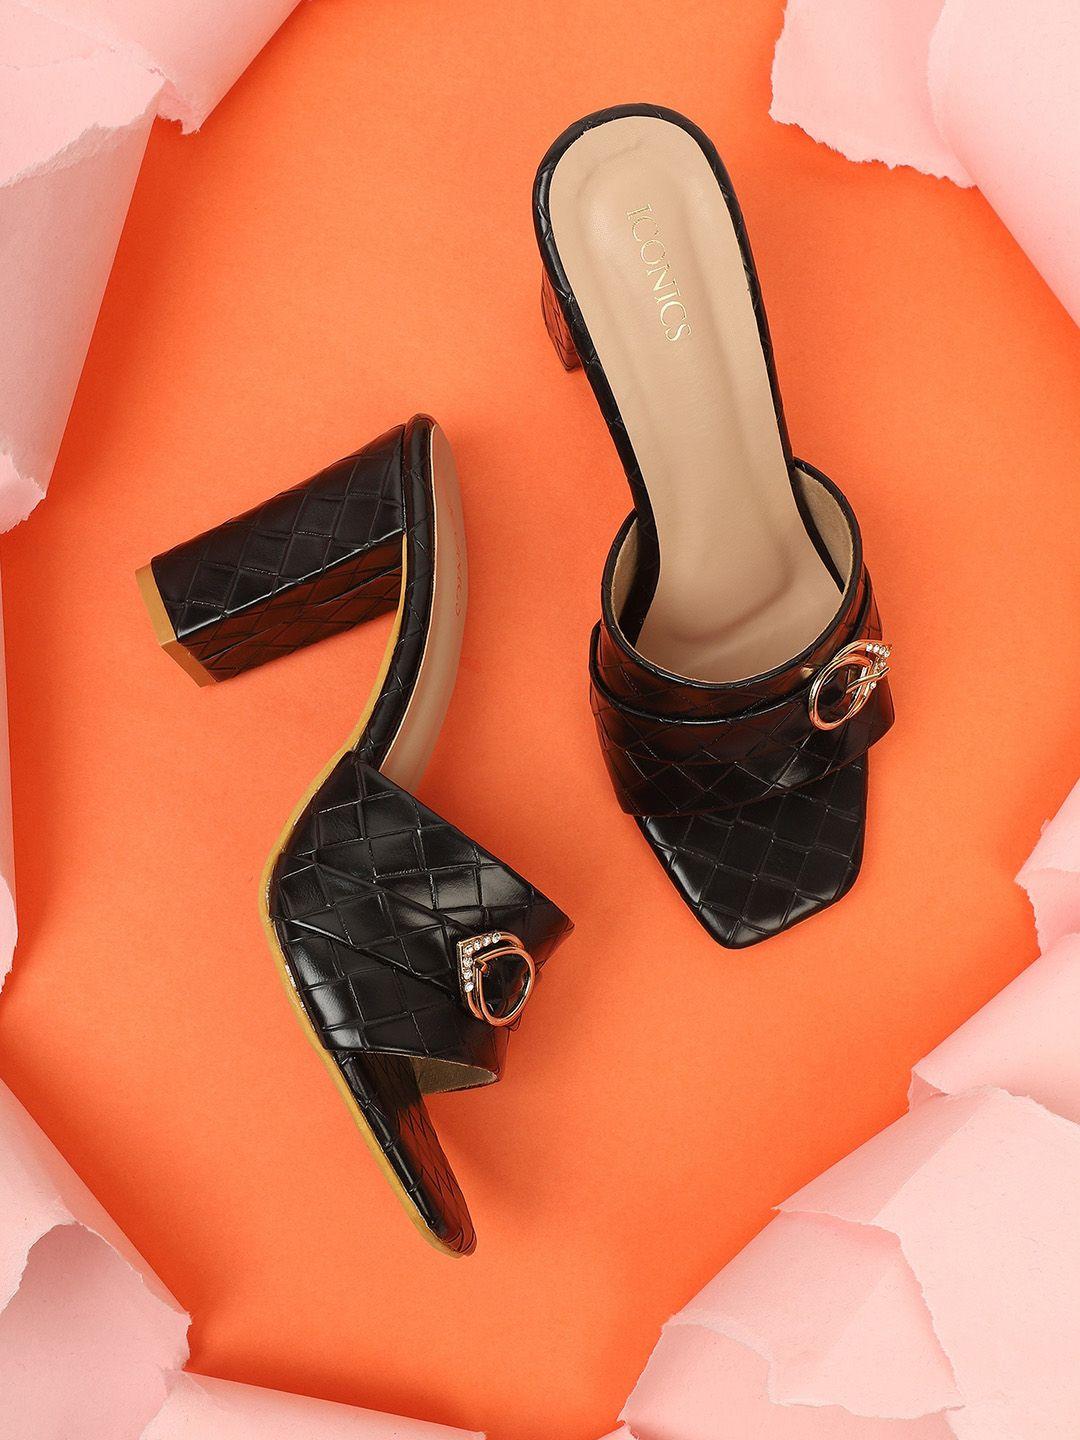 iconics block pumps with buckles